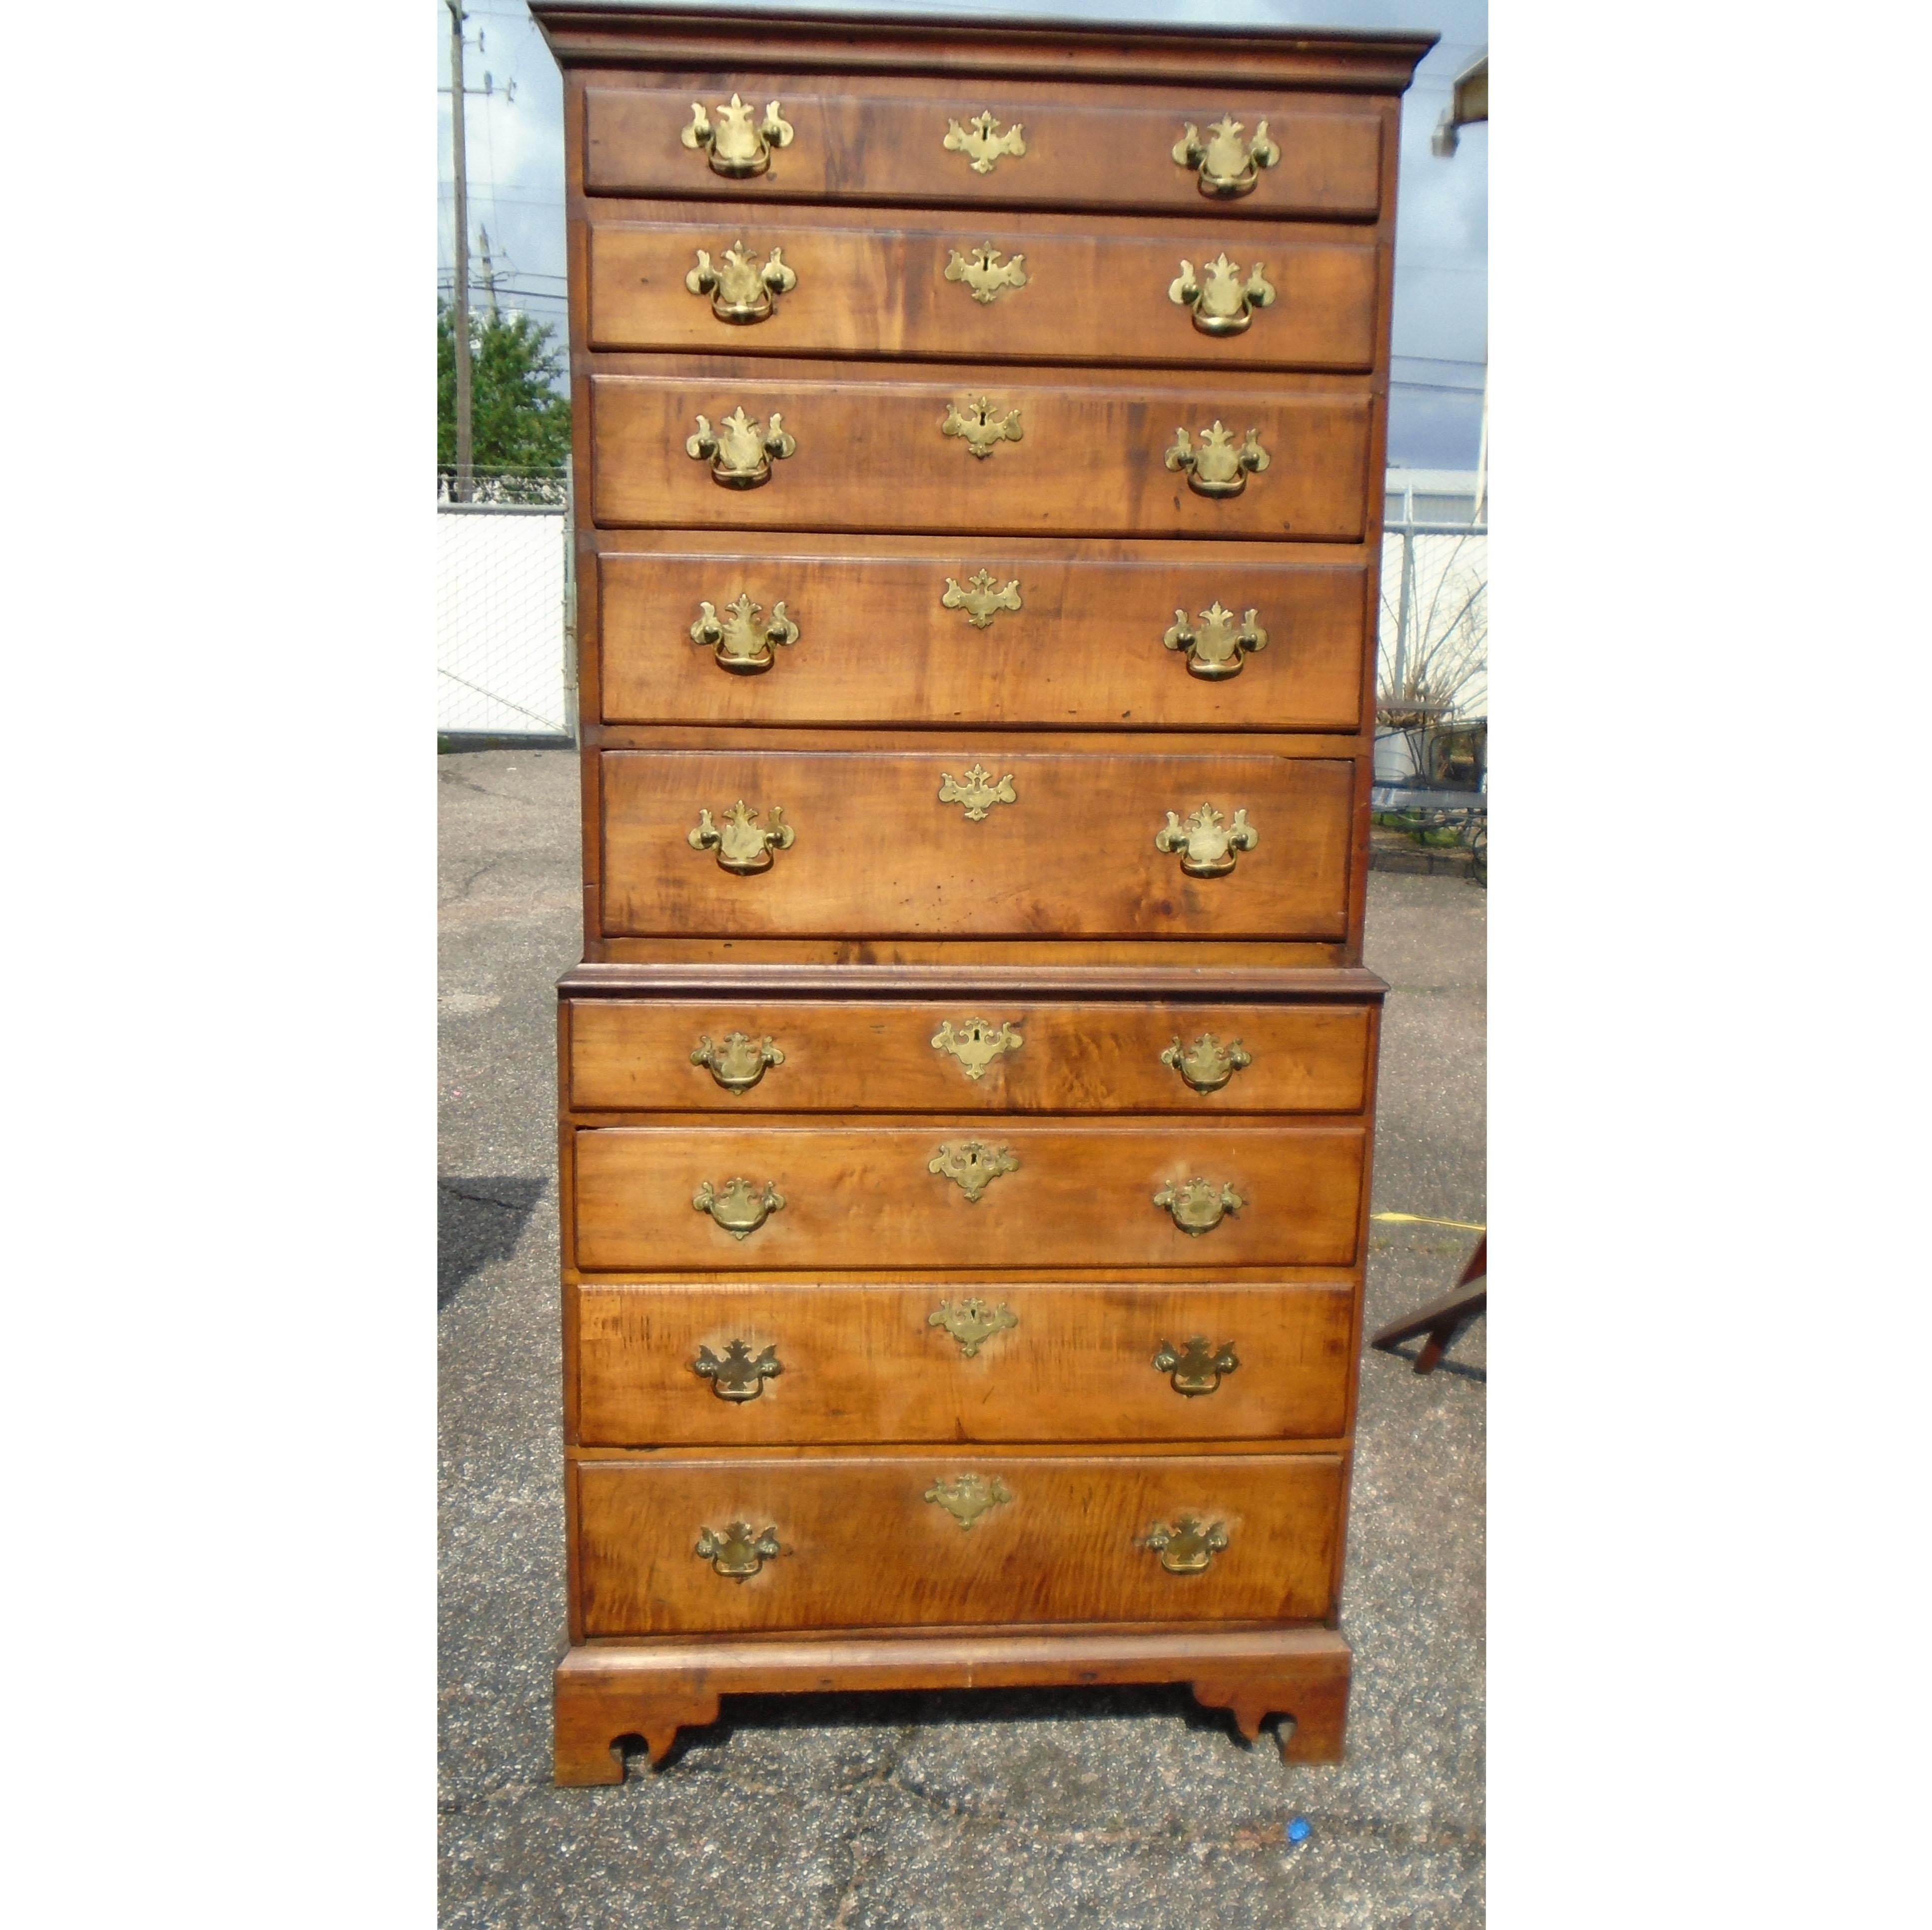 Nine-drawers chest-on-chest

A graduated piece with 9 drawers. 
Brass pulls. Dove-tailed joints.

Measures: 36.5